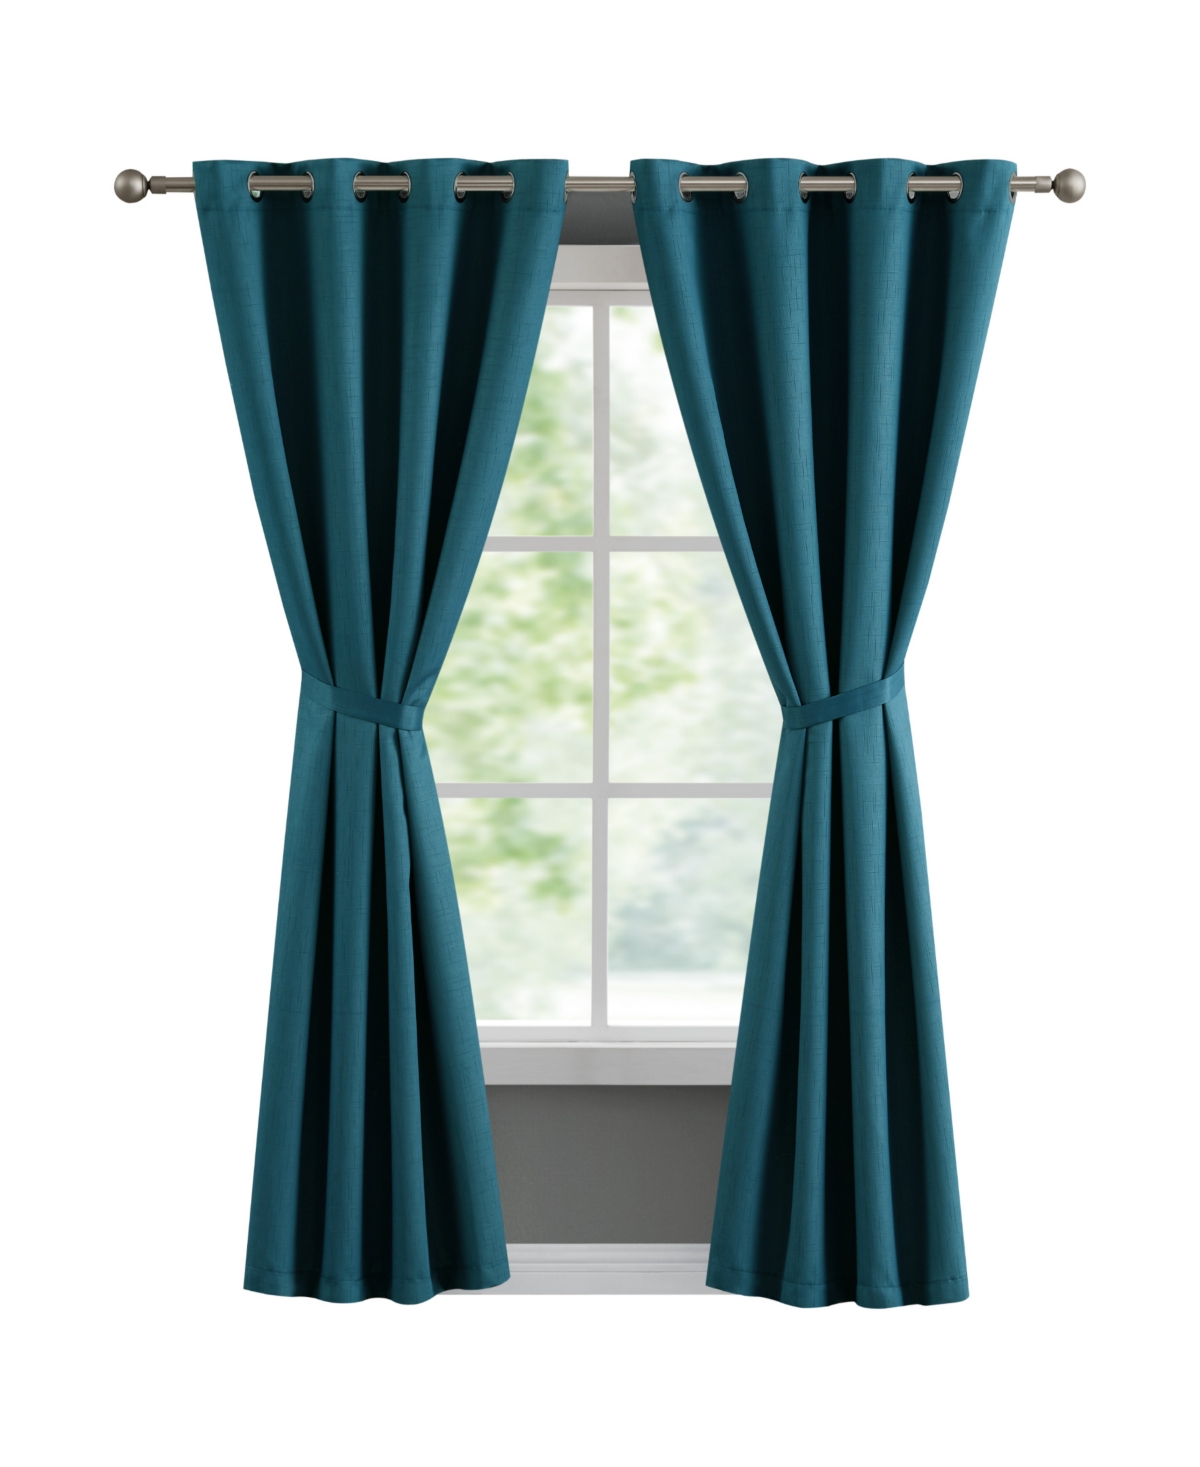 French Connection Ebony Thermal Woven Room Darkening Grommet Window Curtain Panel Pair With Tiebacks, 50" X 84" In Mineral